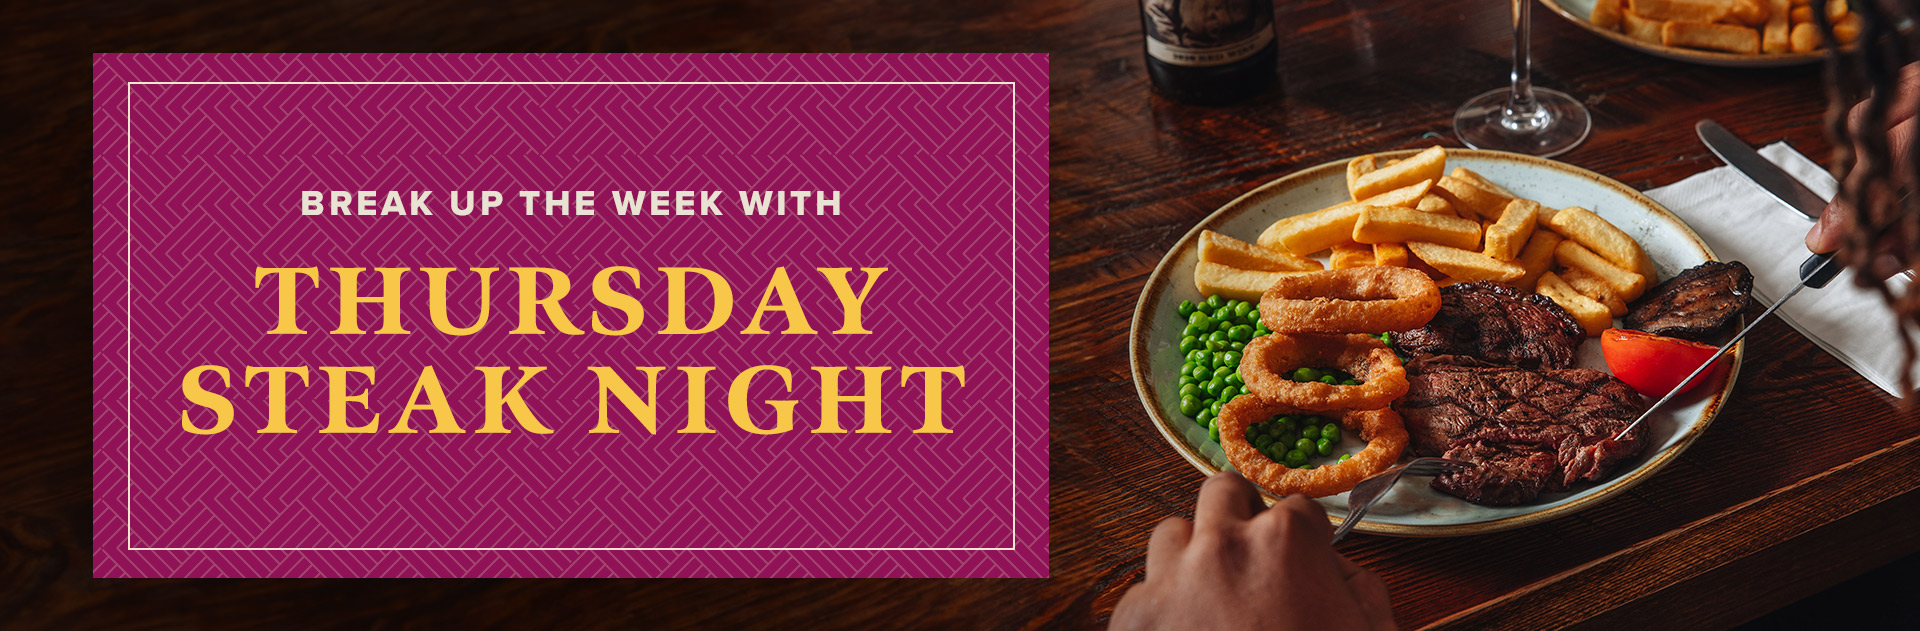 Thursday Steak Night at The Blunsdon Arms